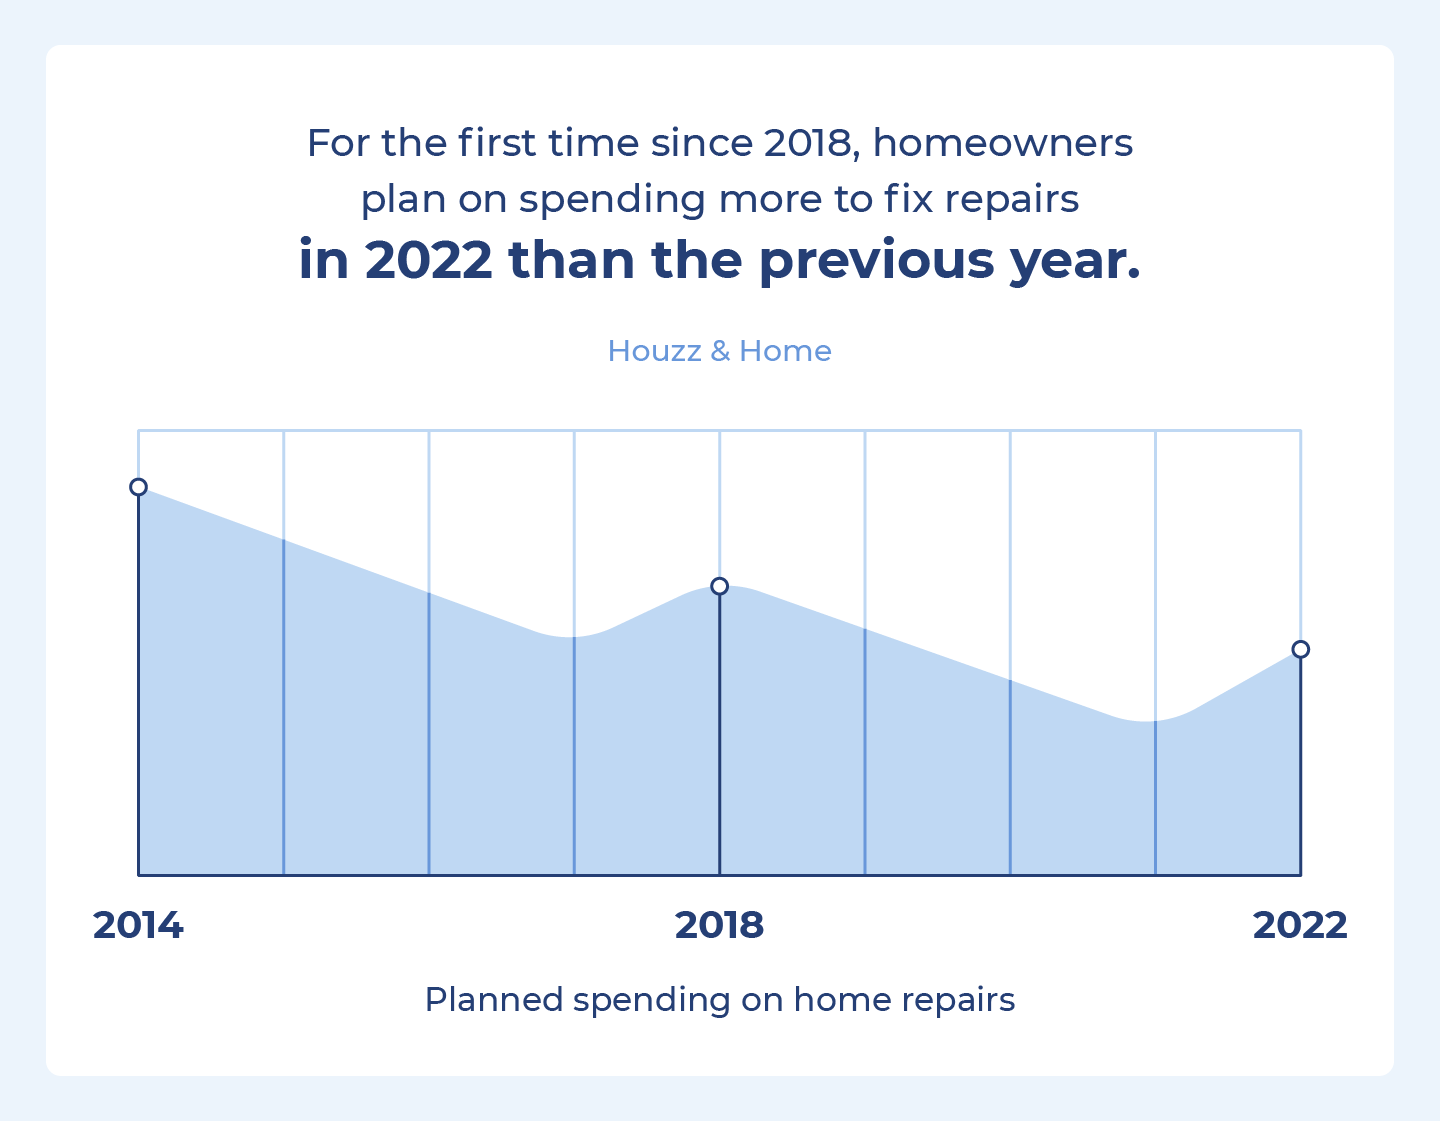 For the first time since 2018, homeowners plan on spending more to fix repairs in 2022 than the previous year.